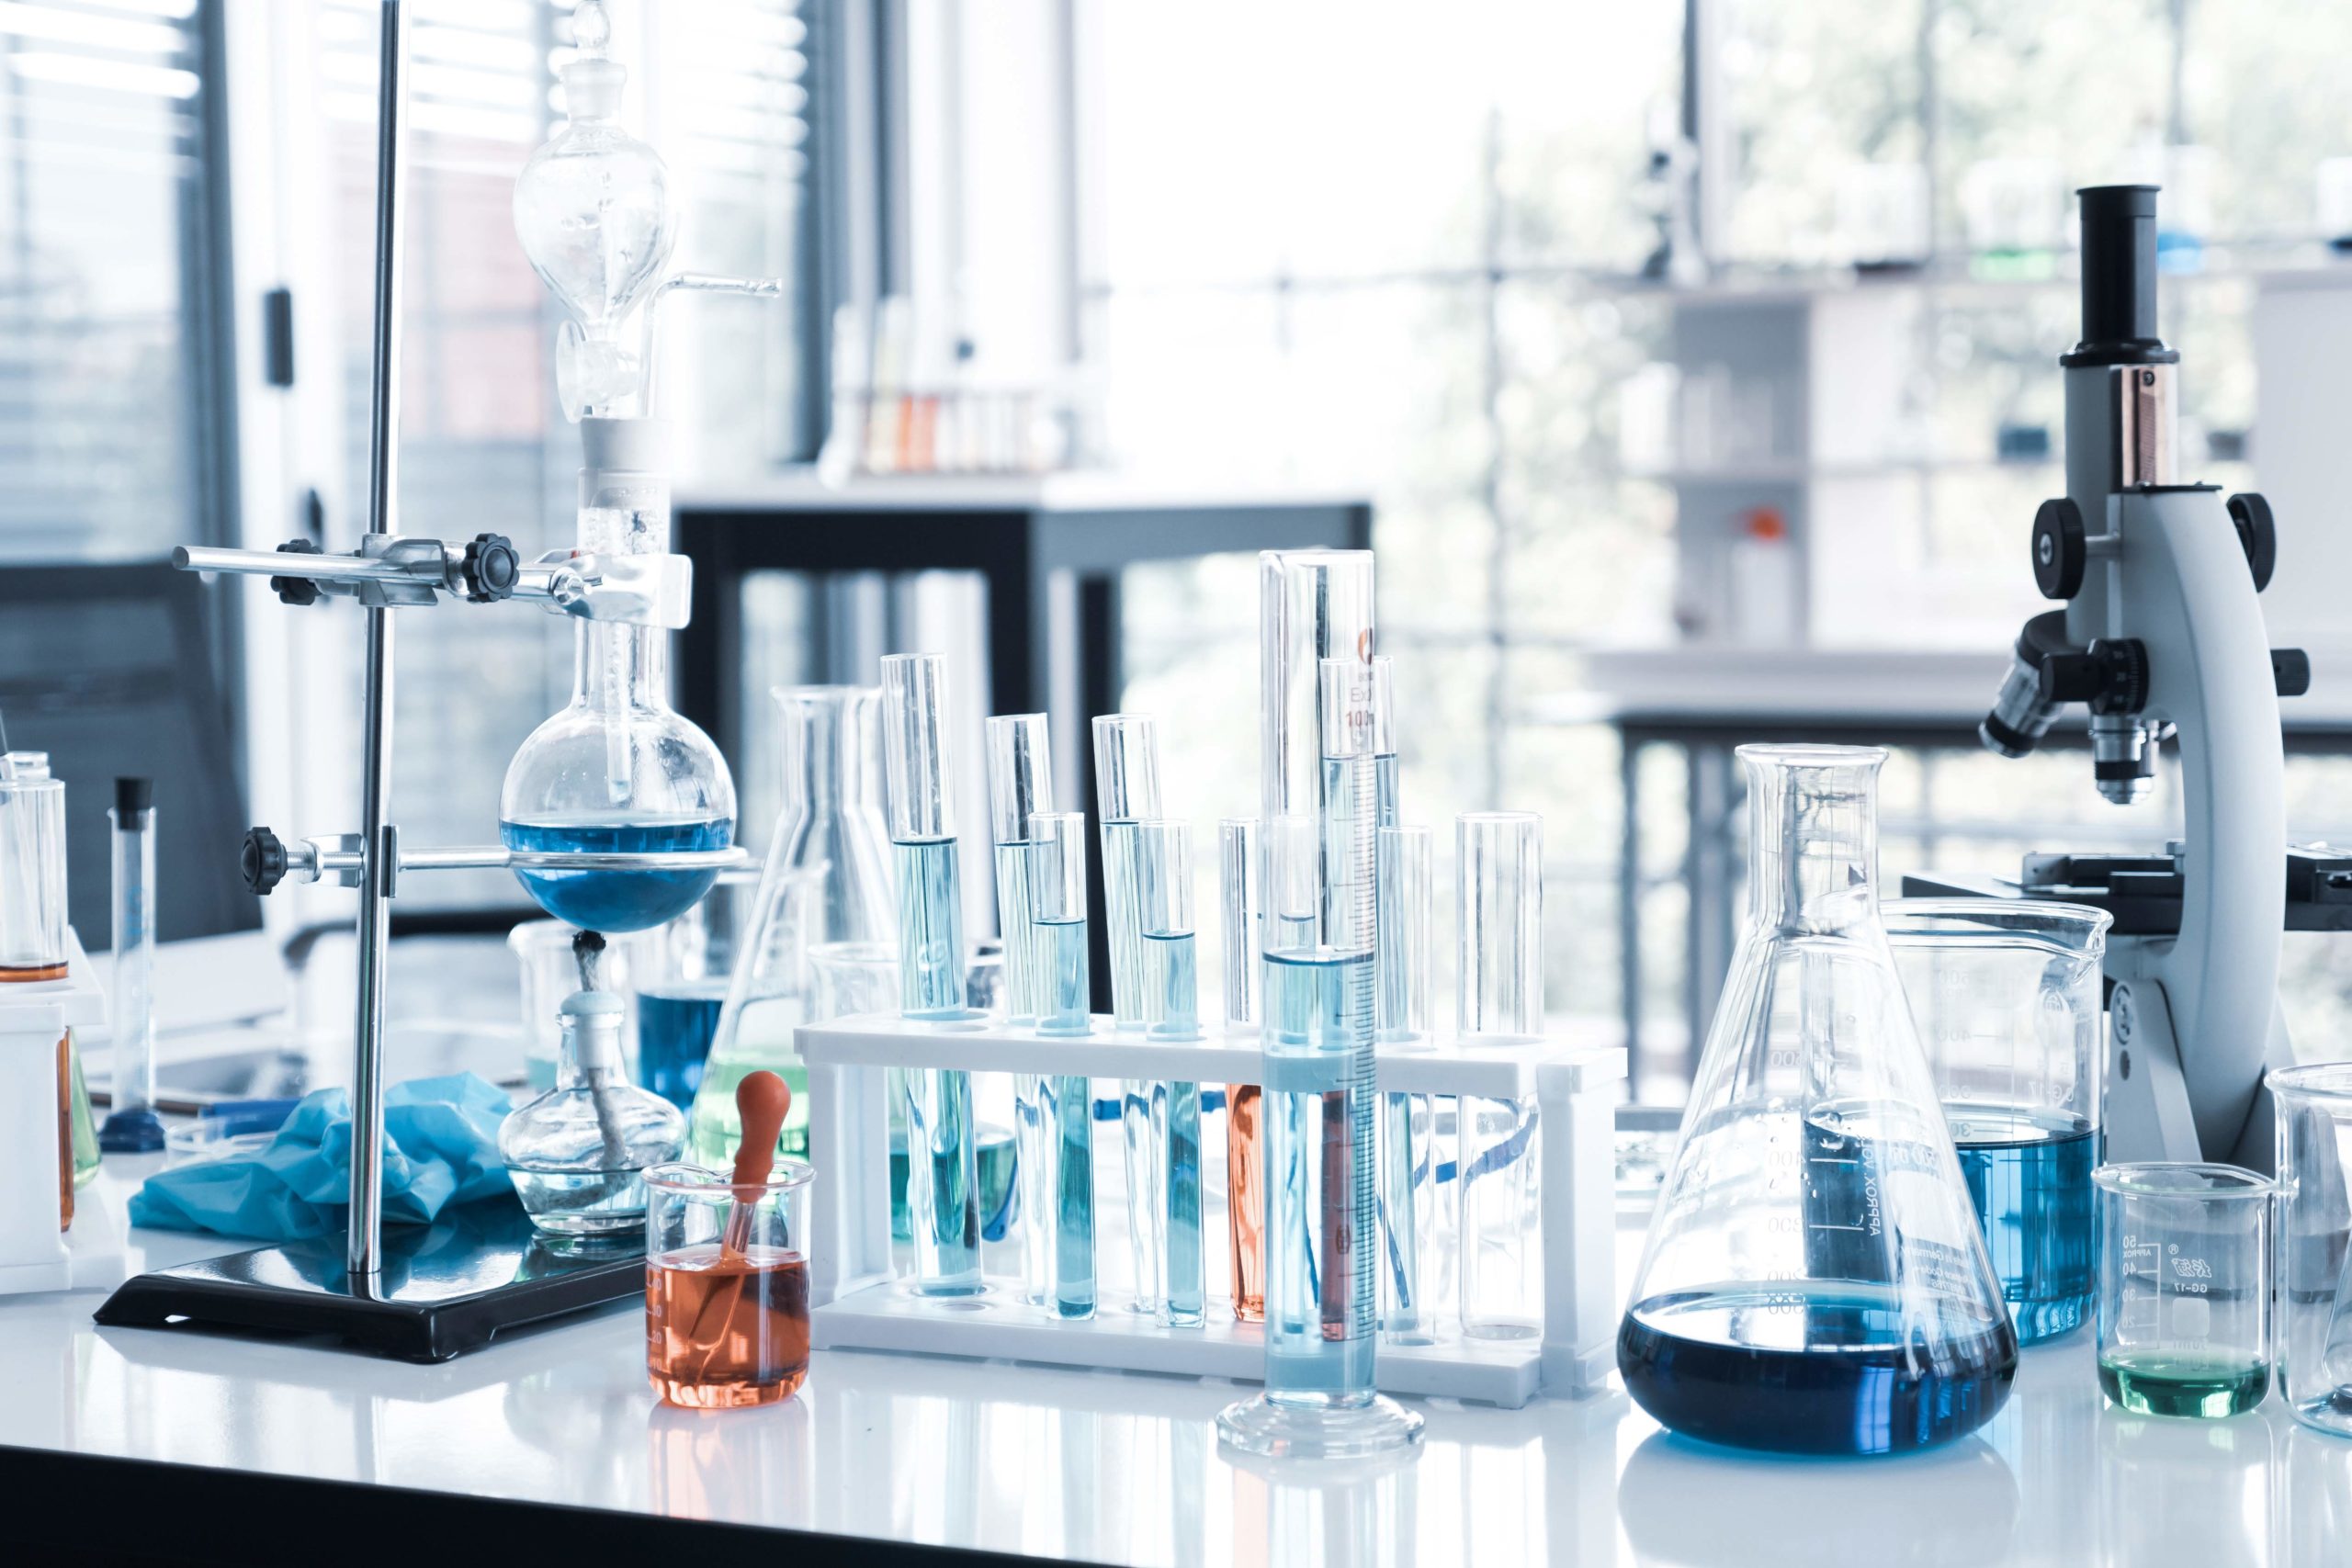 Sell Used Lab Equipment  Sell Used Scientific Equipment